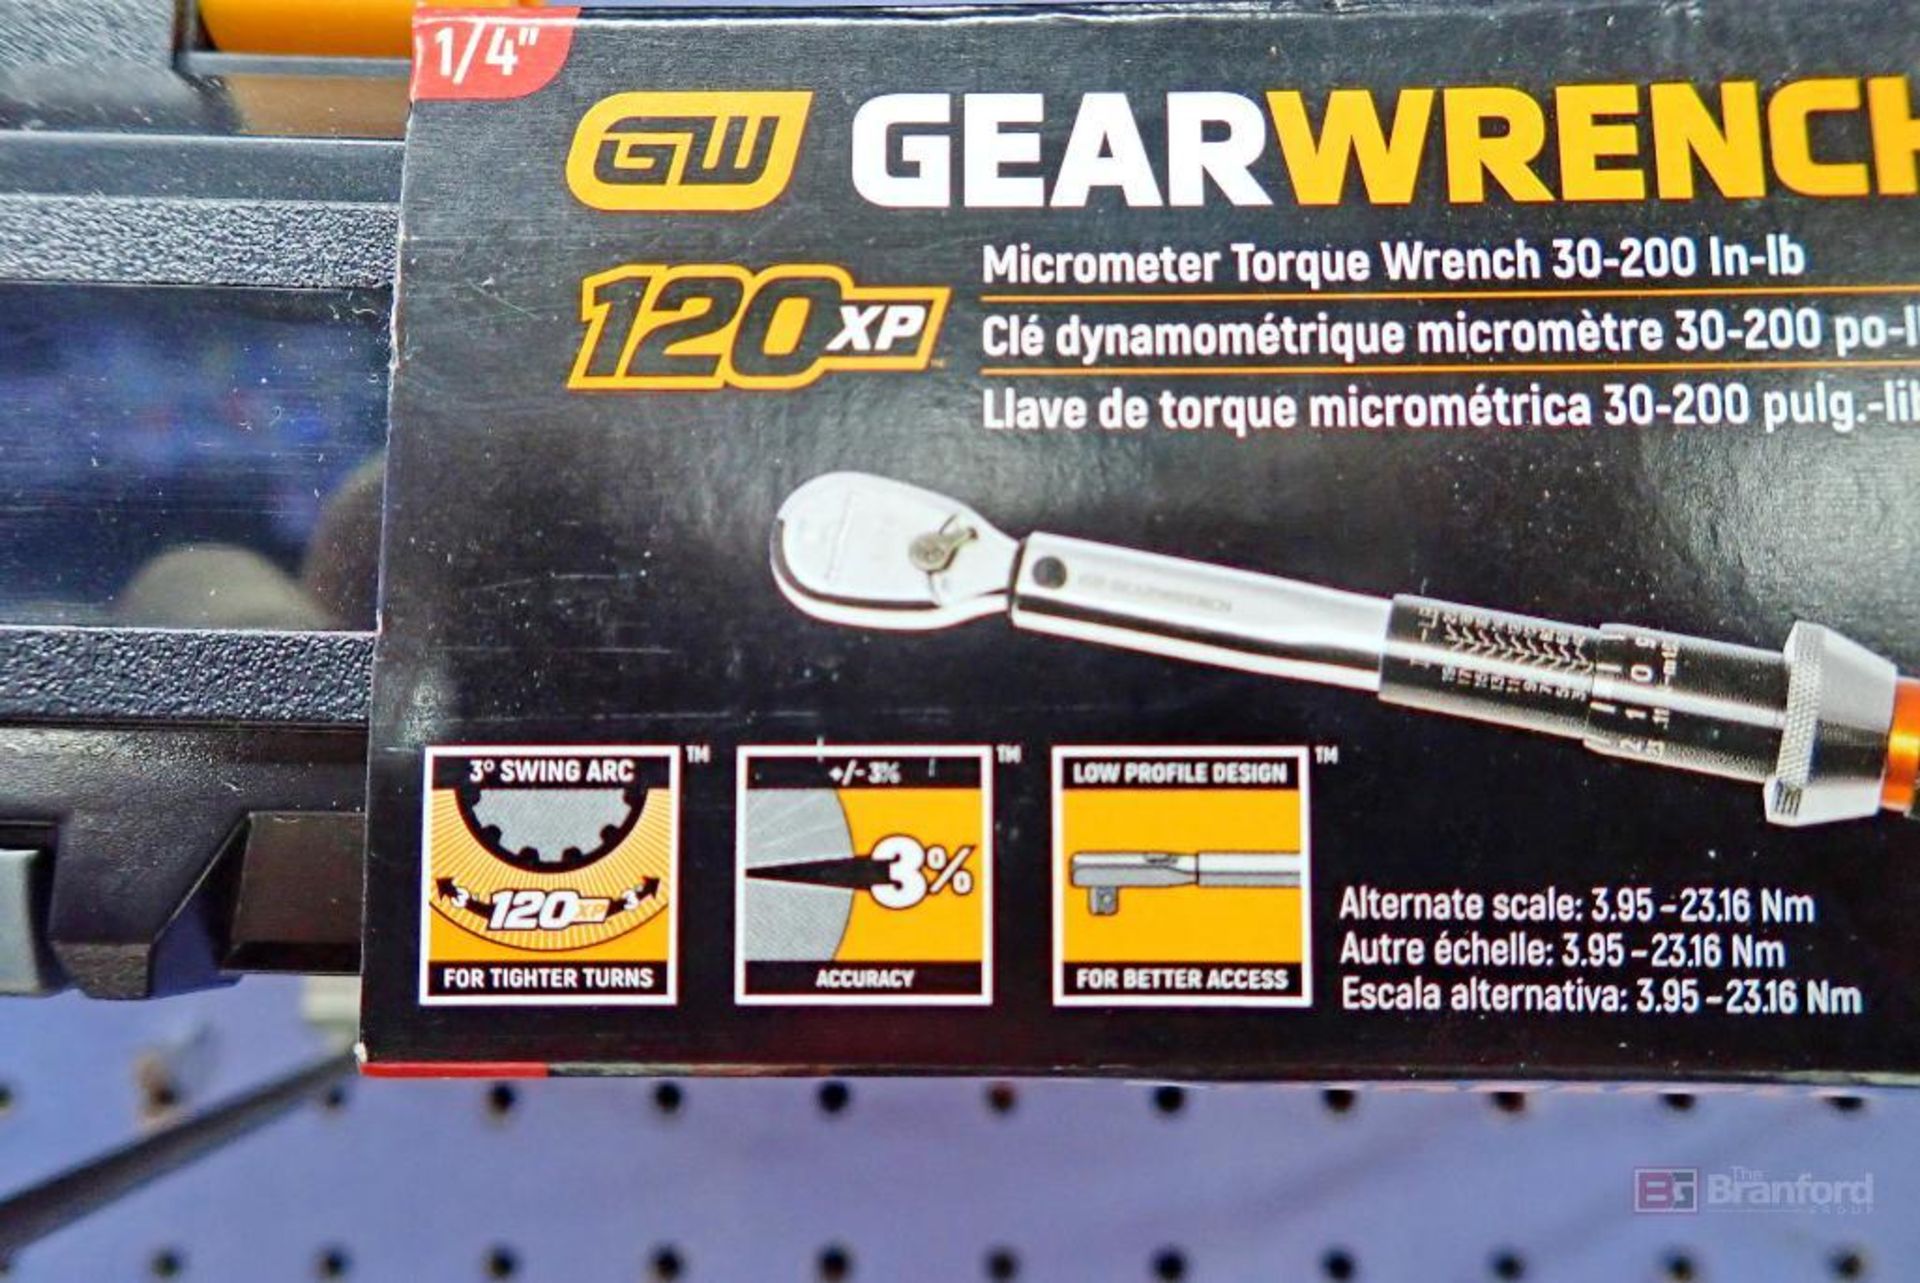 GearWrench 120XP 85171 Micrometer Torque Wrench - Image 3 of 5